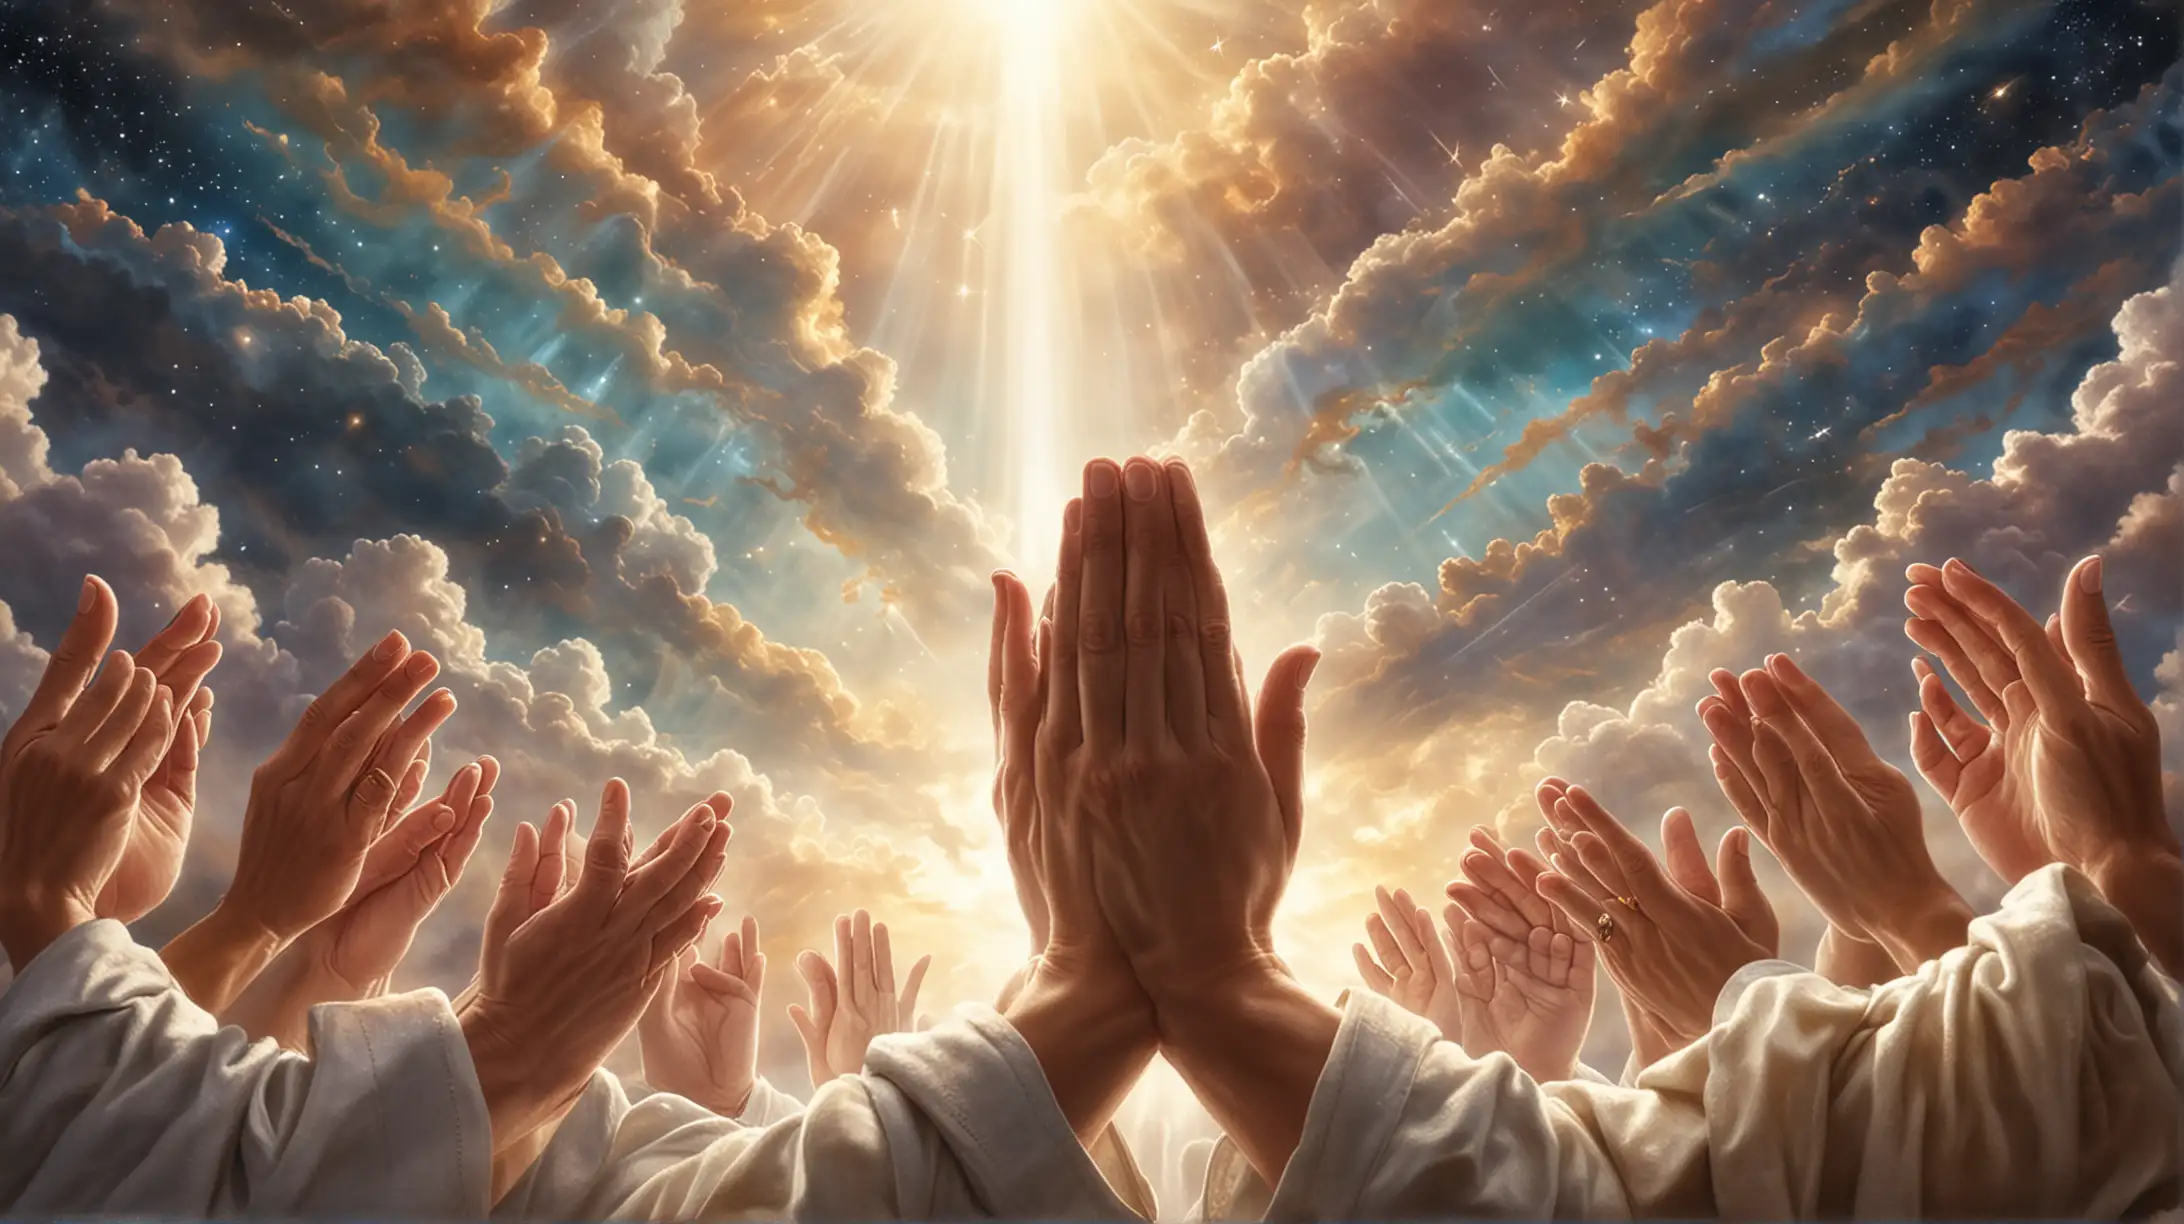 Create an eye-catching thumbnail an image focusing on hands clasped together in prayer, reaching upward toward the heavens. This visual representation captures the essence of seeking and knocking, as described in the story, and conveys a sense of hope, faith, and connection to the divine